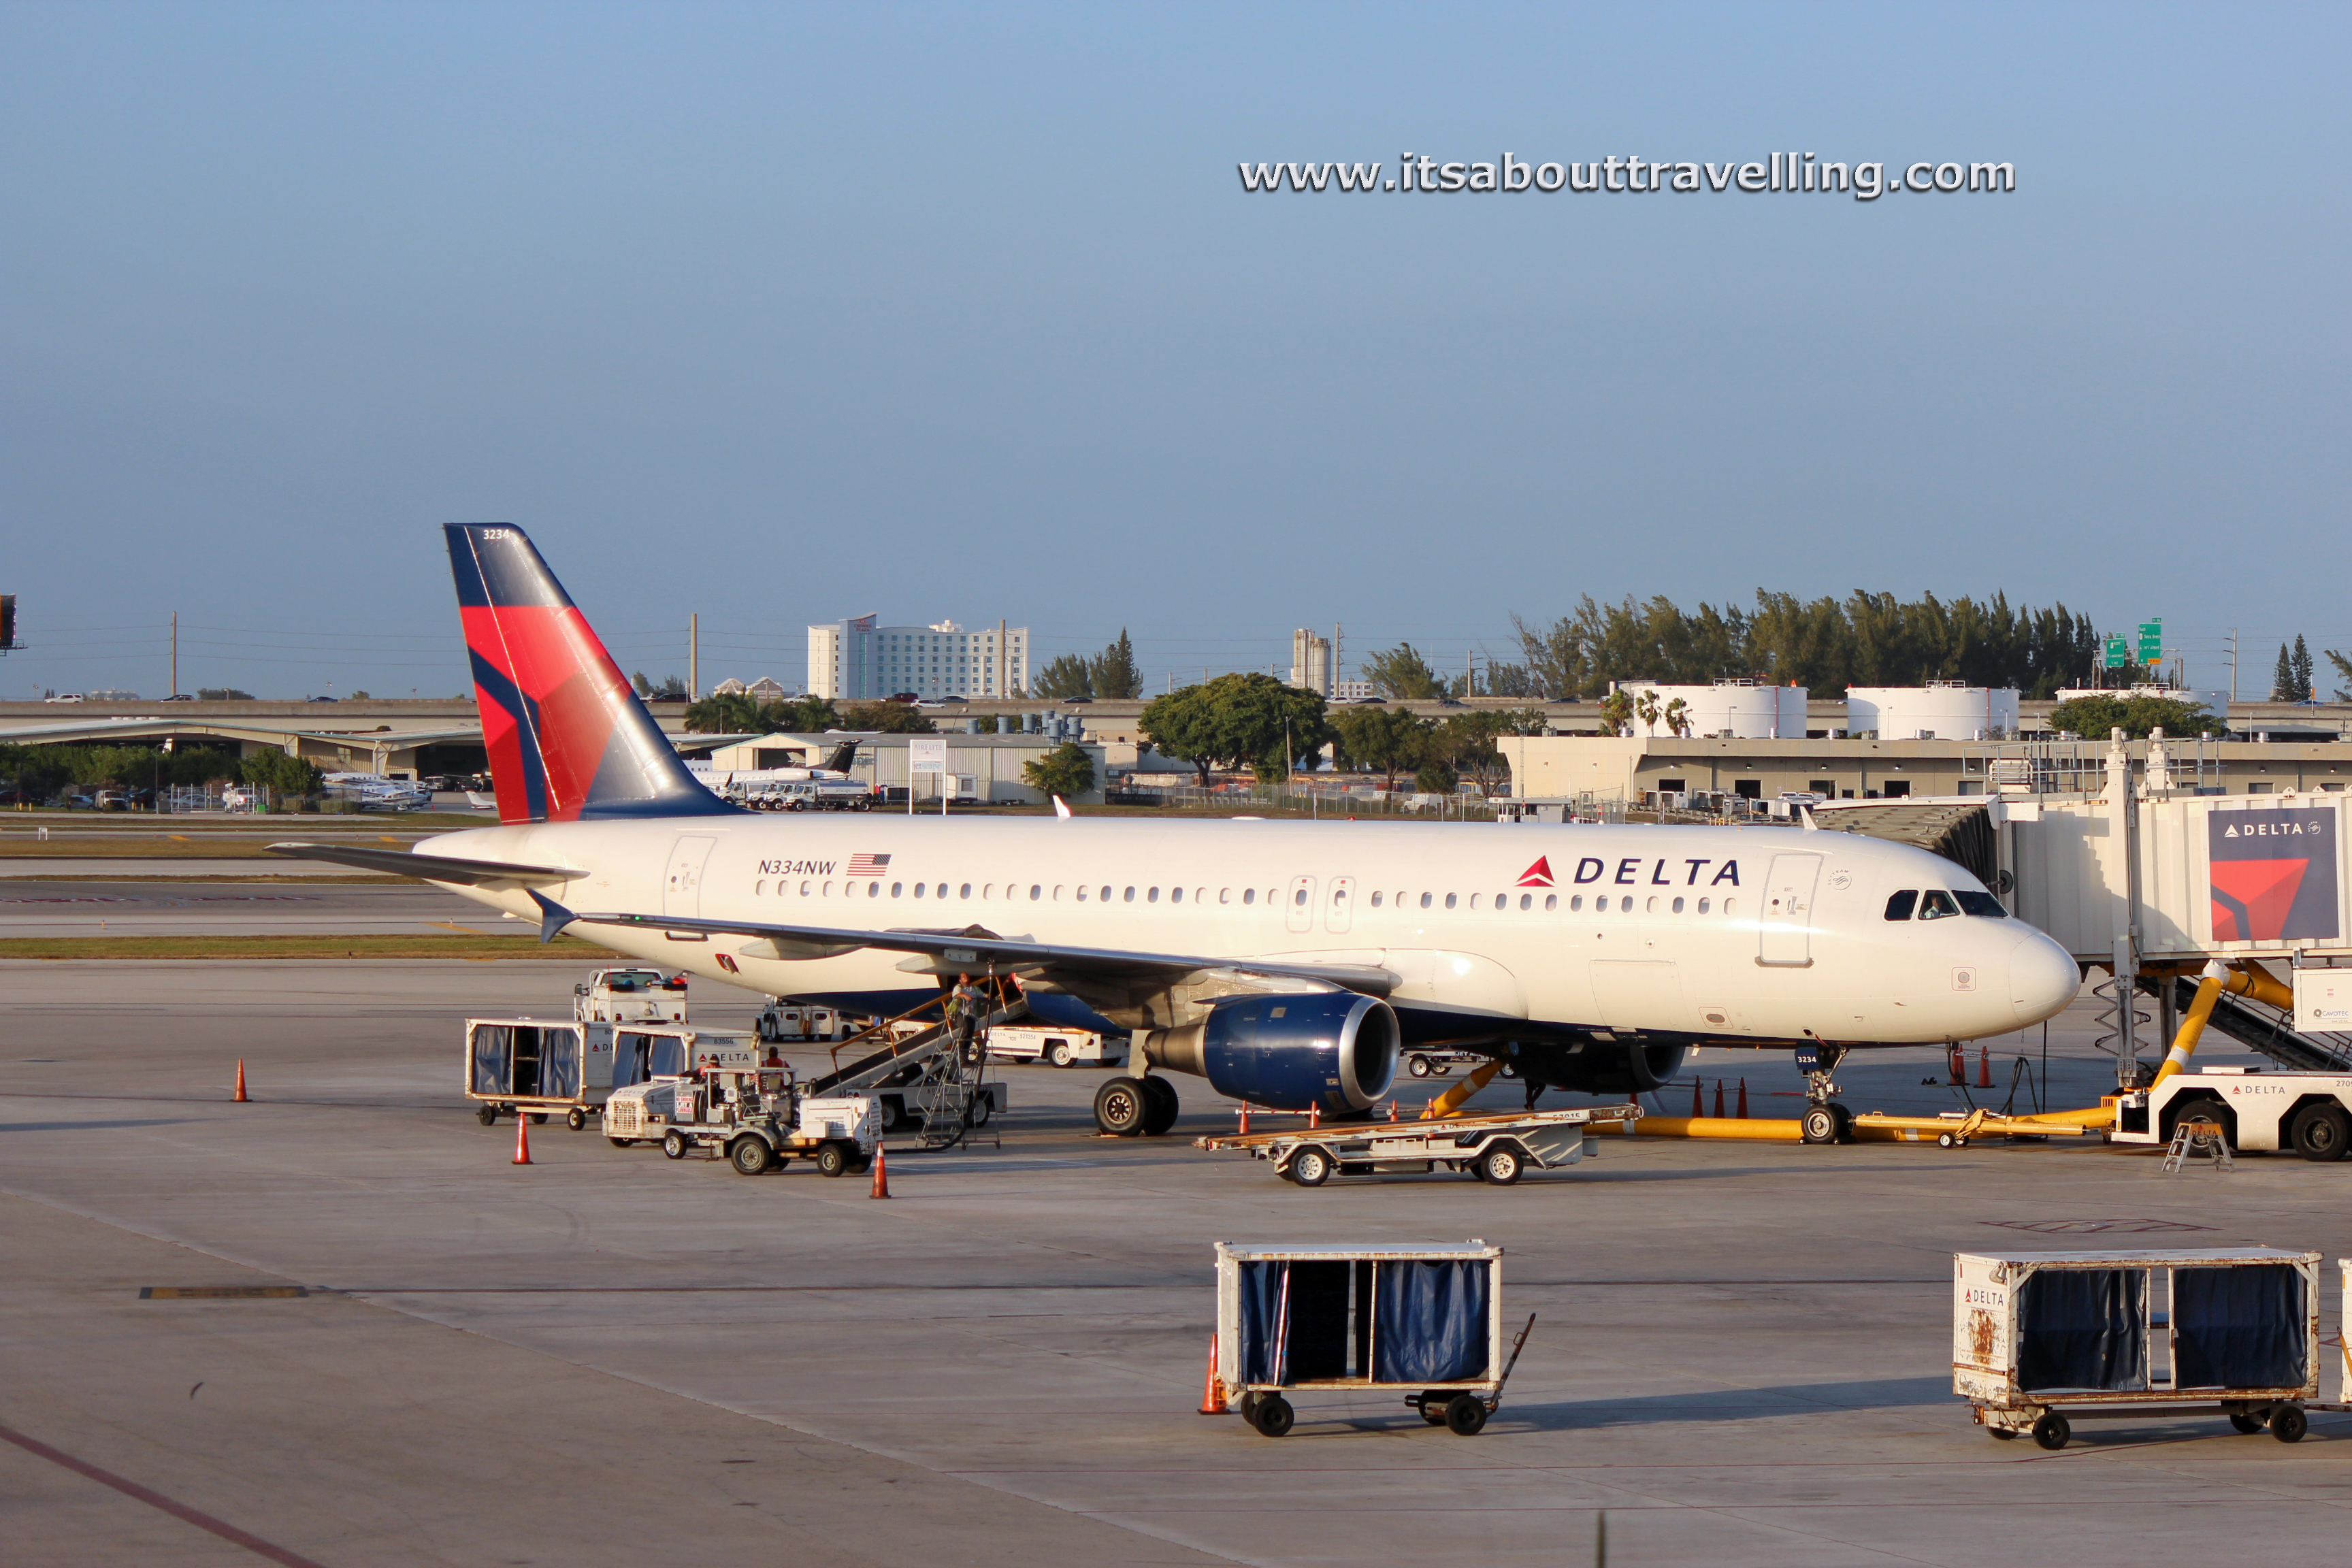 Plane Spotting at FLL (Ft. Lauderdale, Florida) - It's About Travelling3456 x 2304